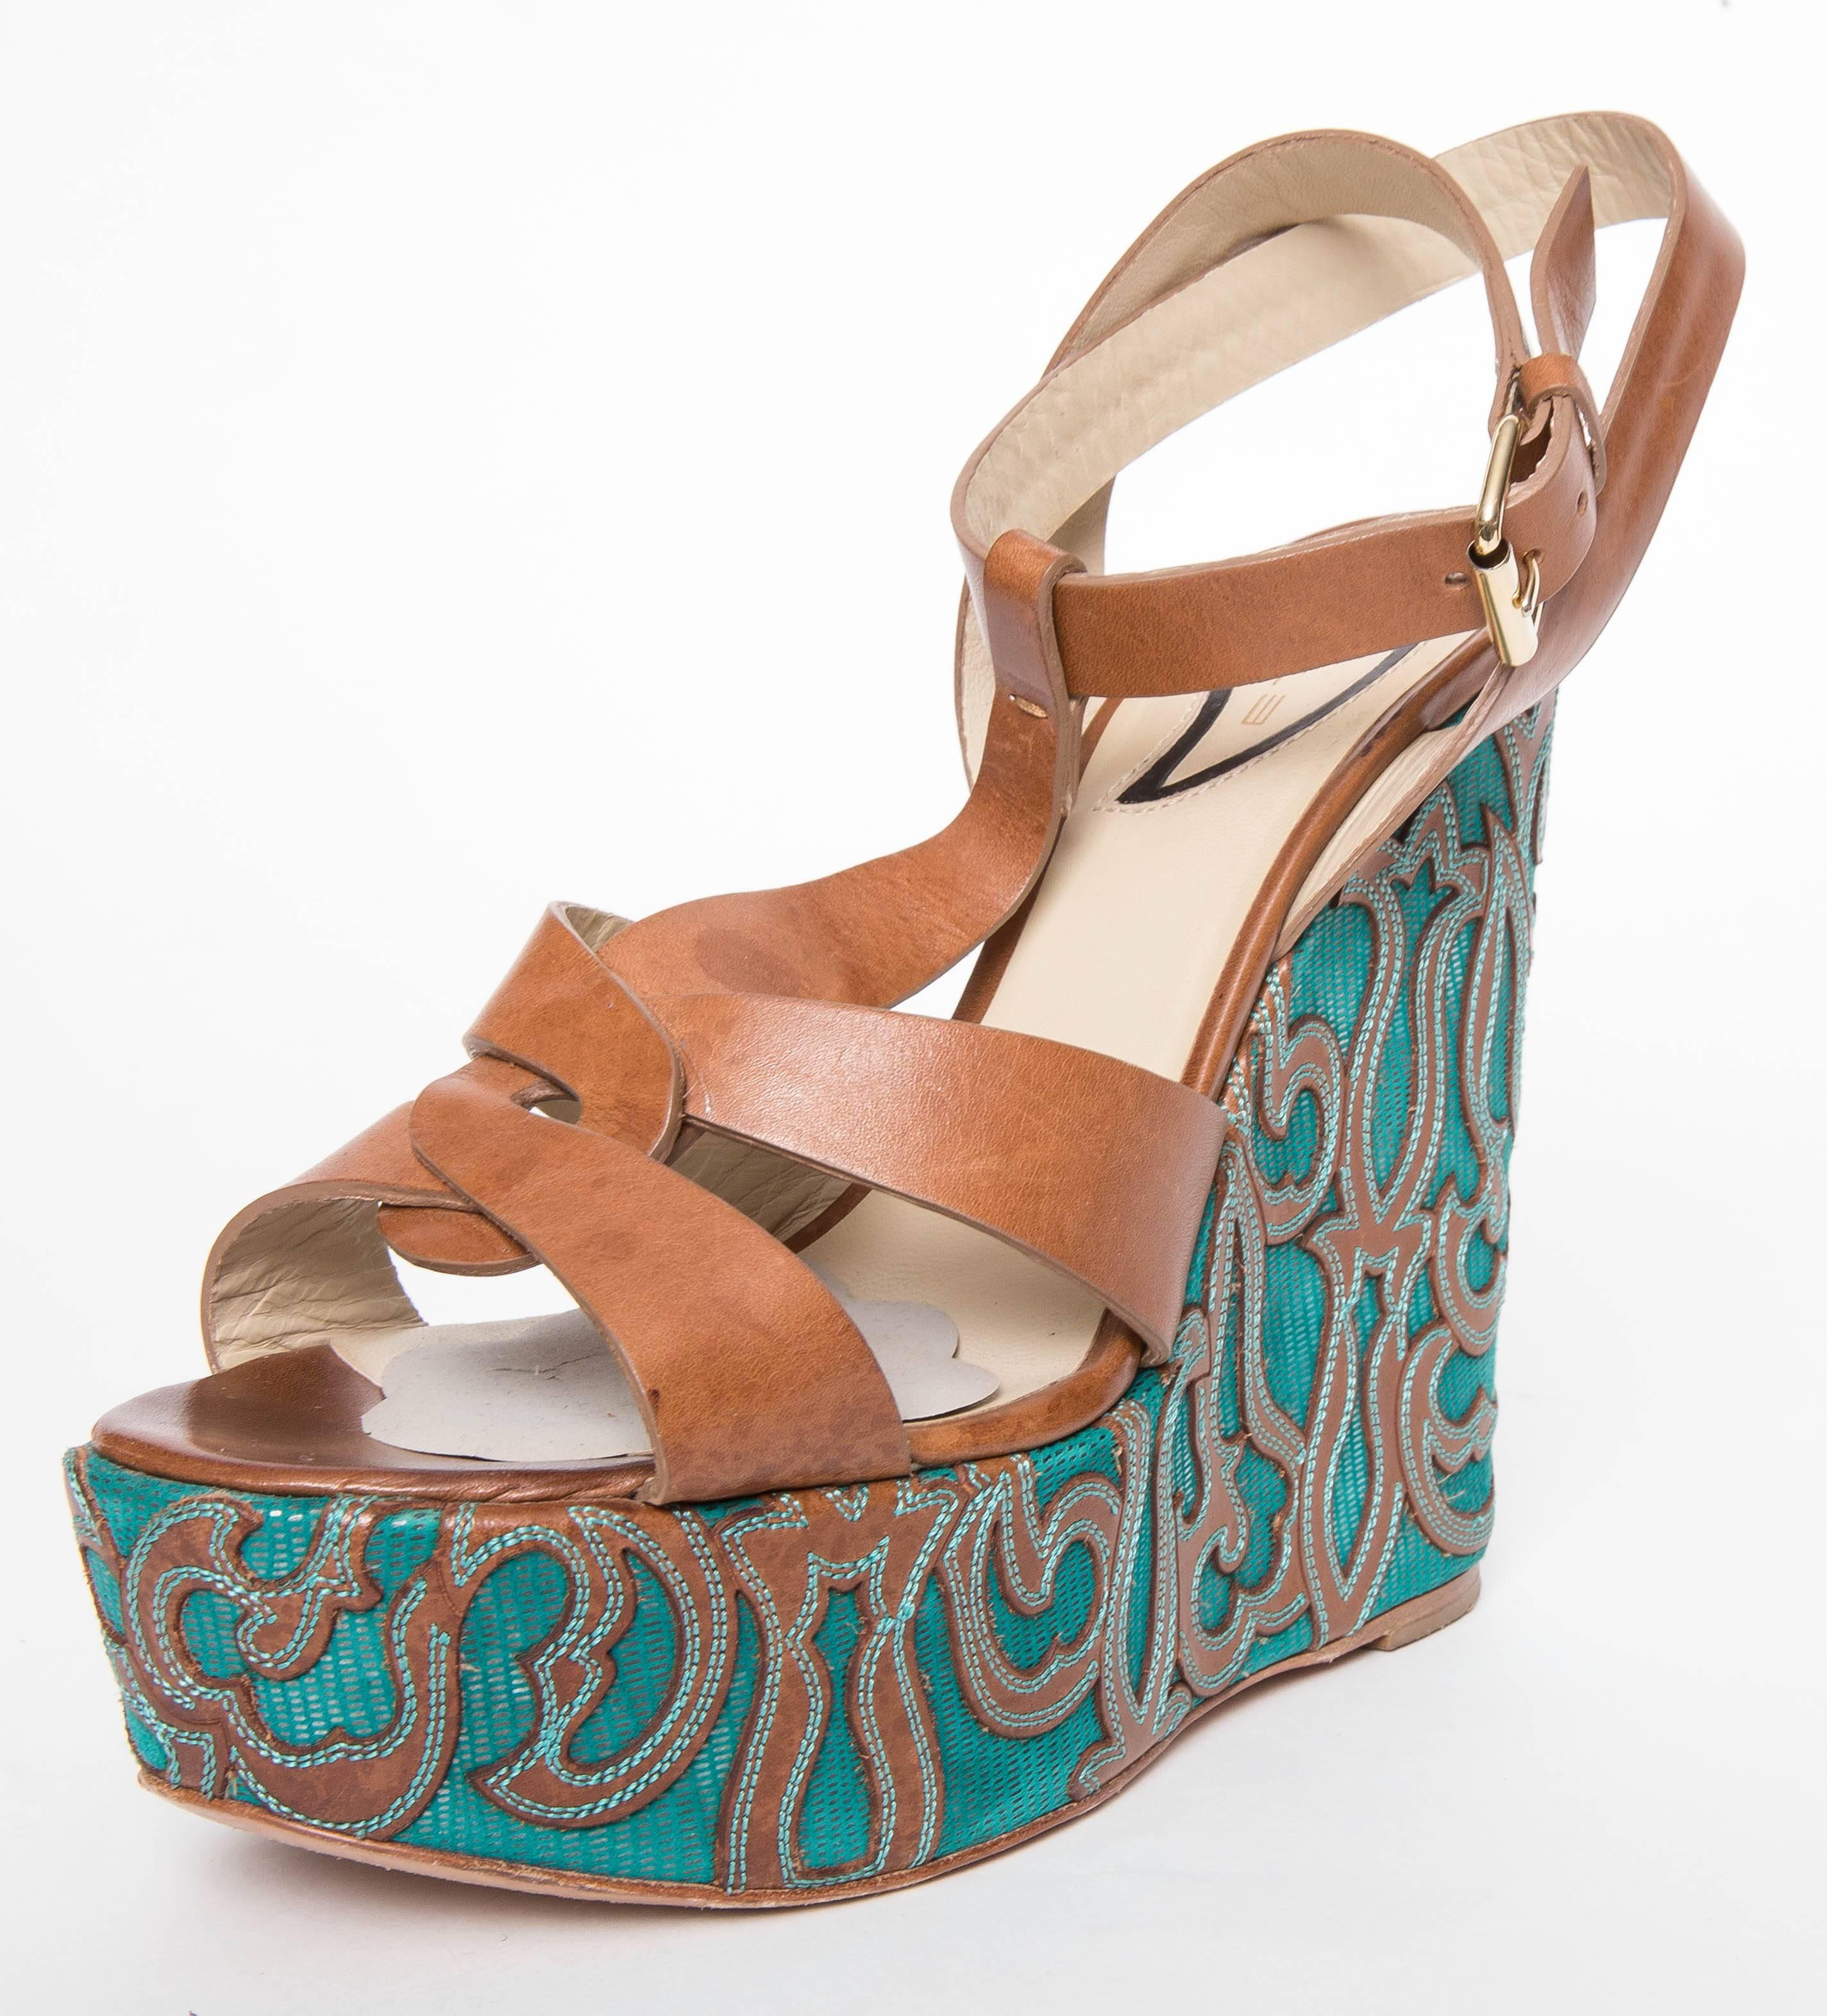 Etro Brown Leather and Turquoise Sole Wedged Sandals feature leather stitched brown design detailed wedge, crisscross adjustable ankle straps, and goldtone buckle.
Does not come with original box.